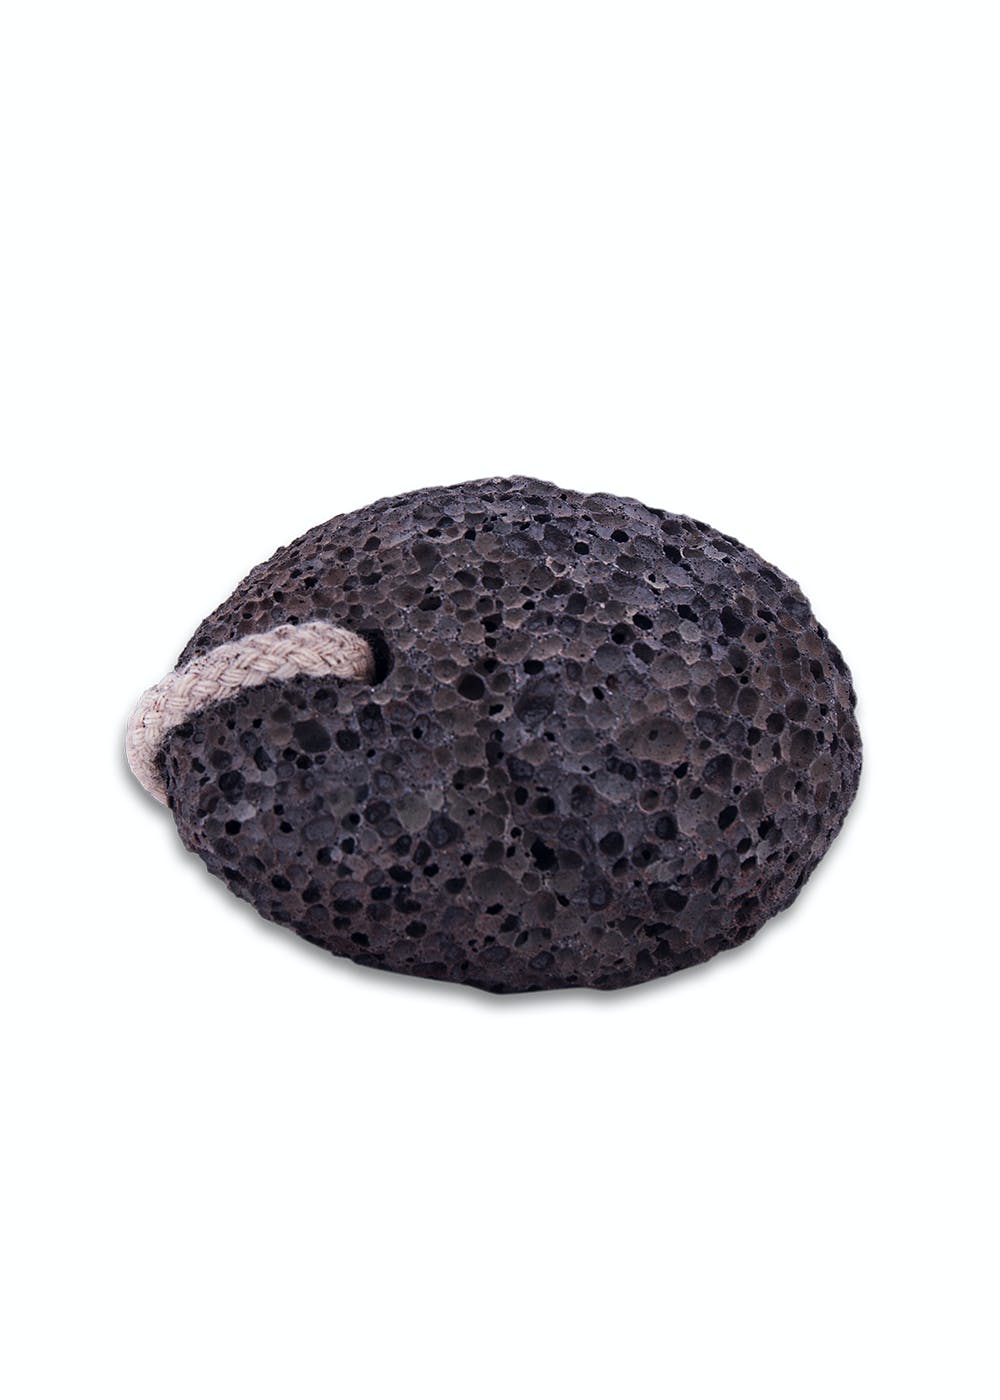 Volcanic Foot Therapy Stone - 1 Piece